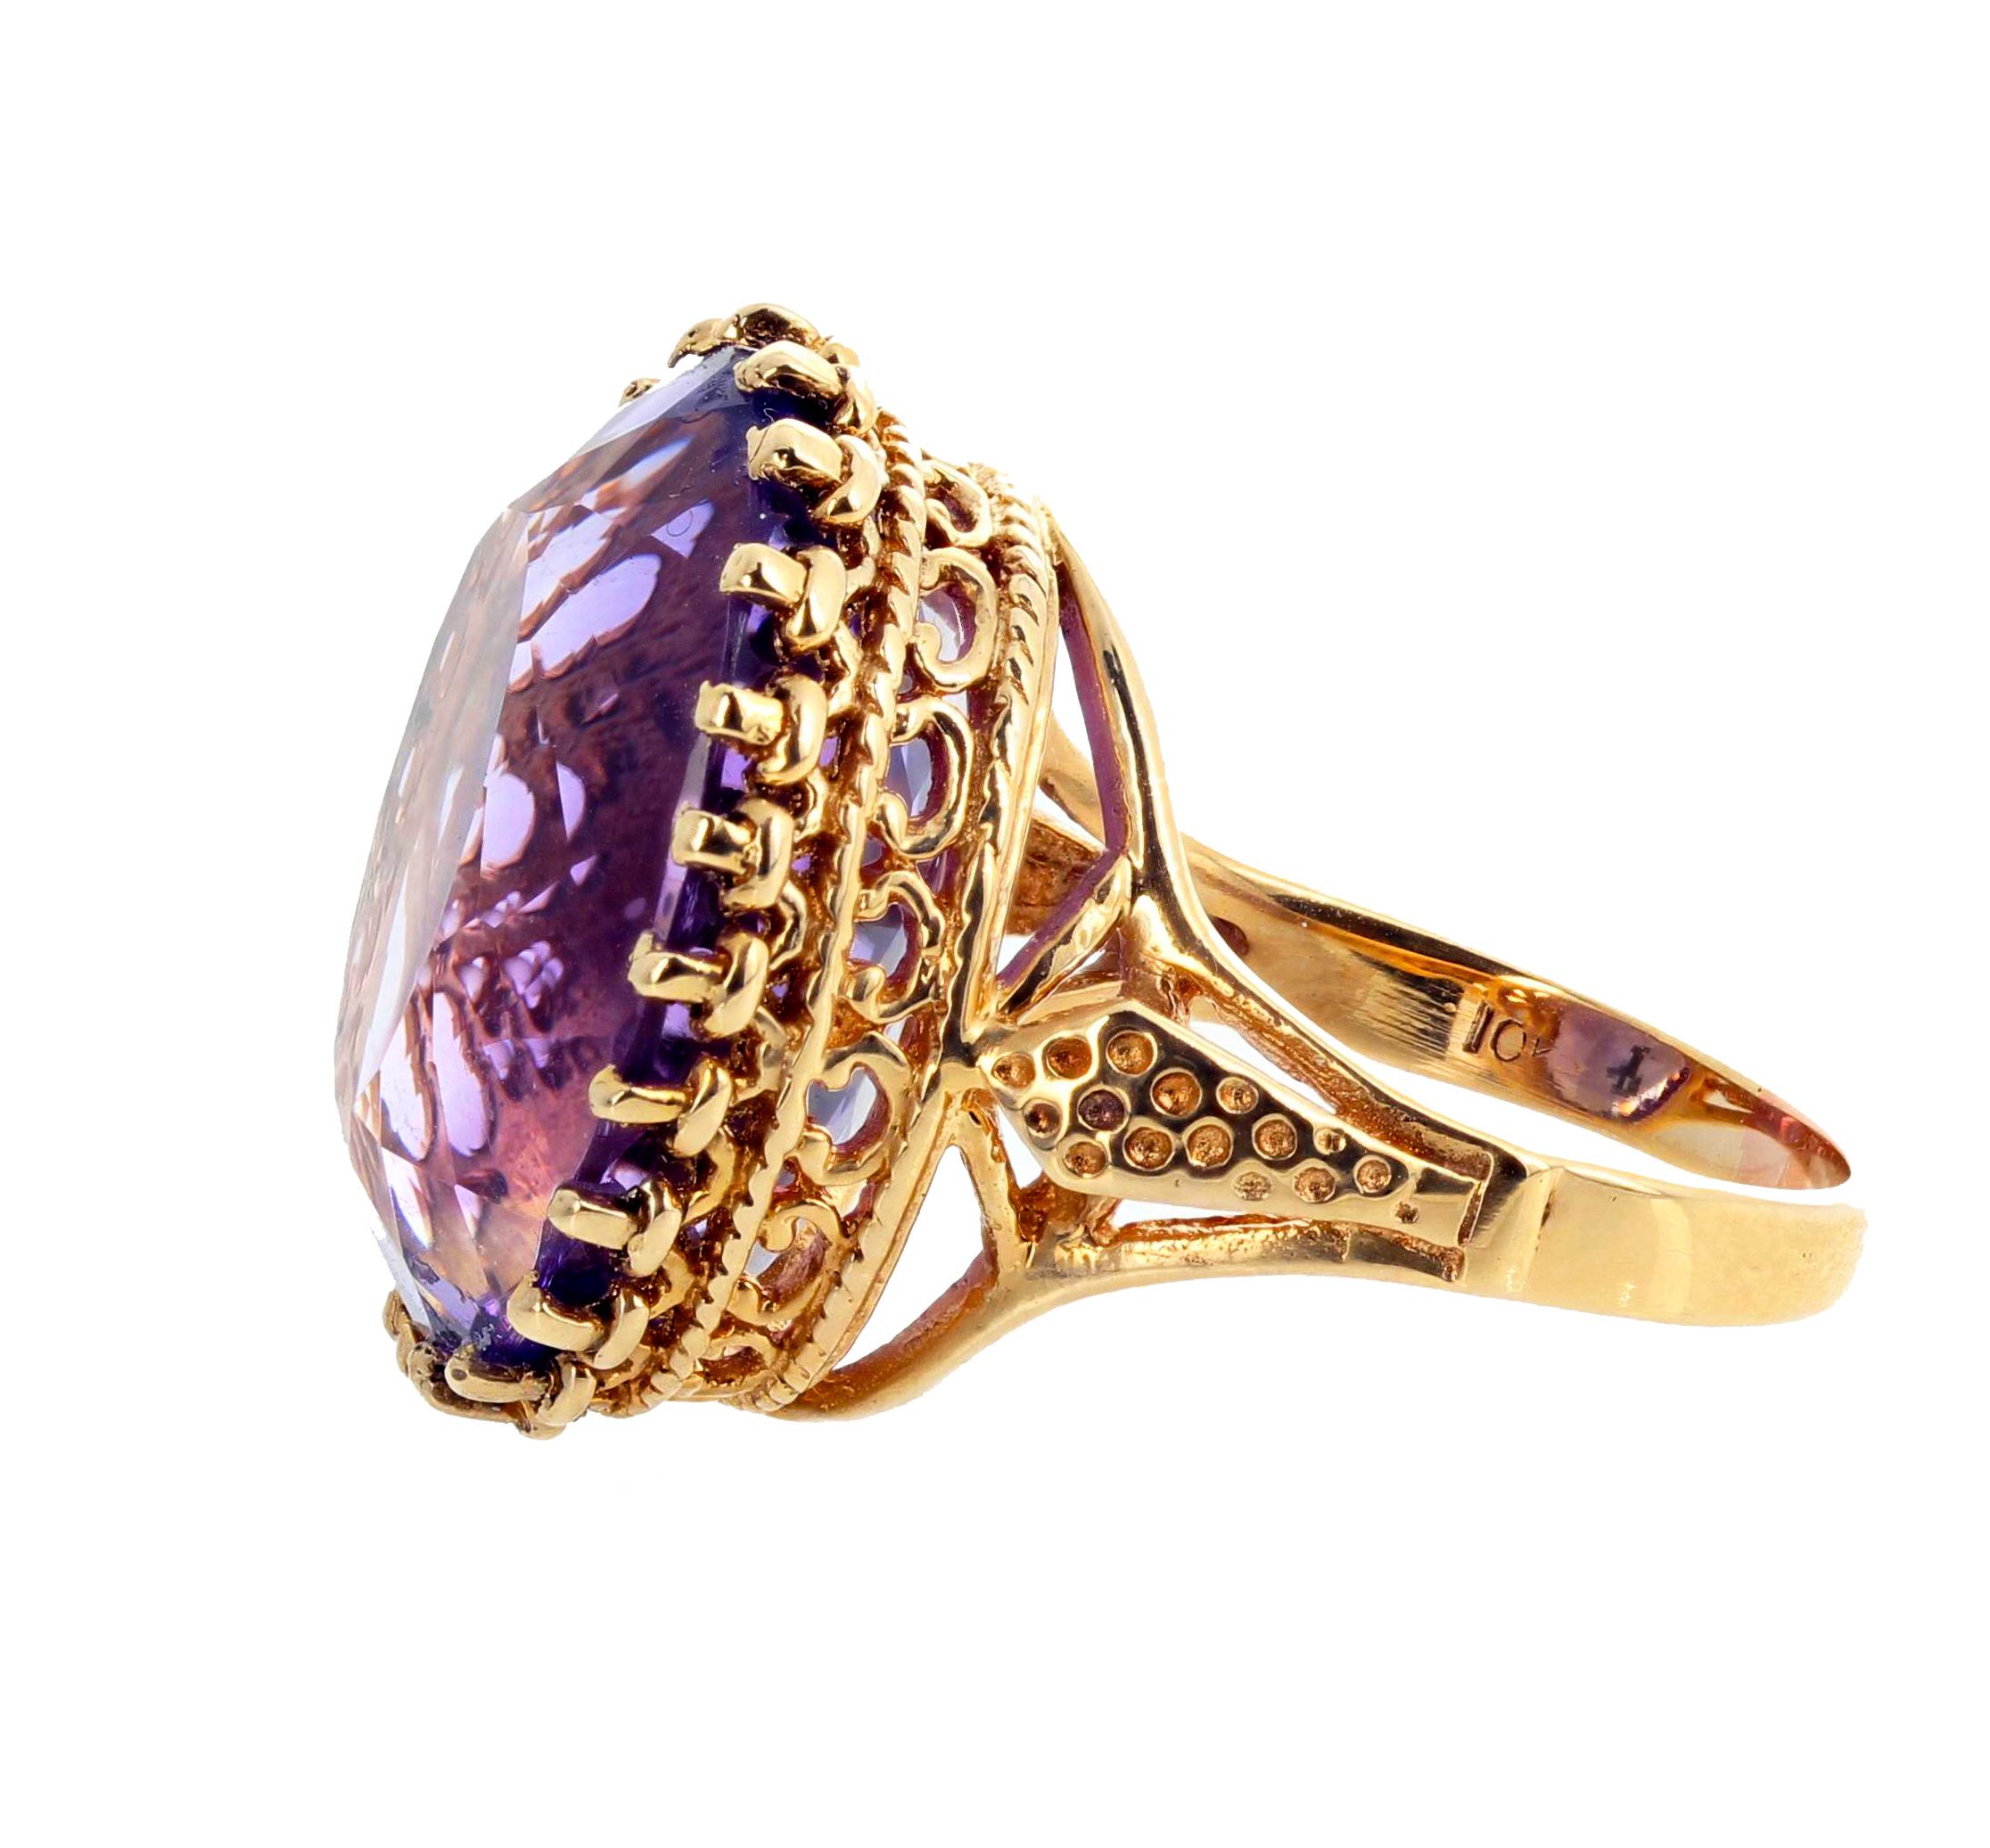 Oval Cut AJD Spectacular Oval Large 21.78 Ct Sparkling Amethyst Gold Cocktail Ring